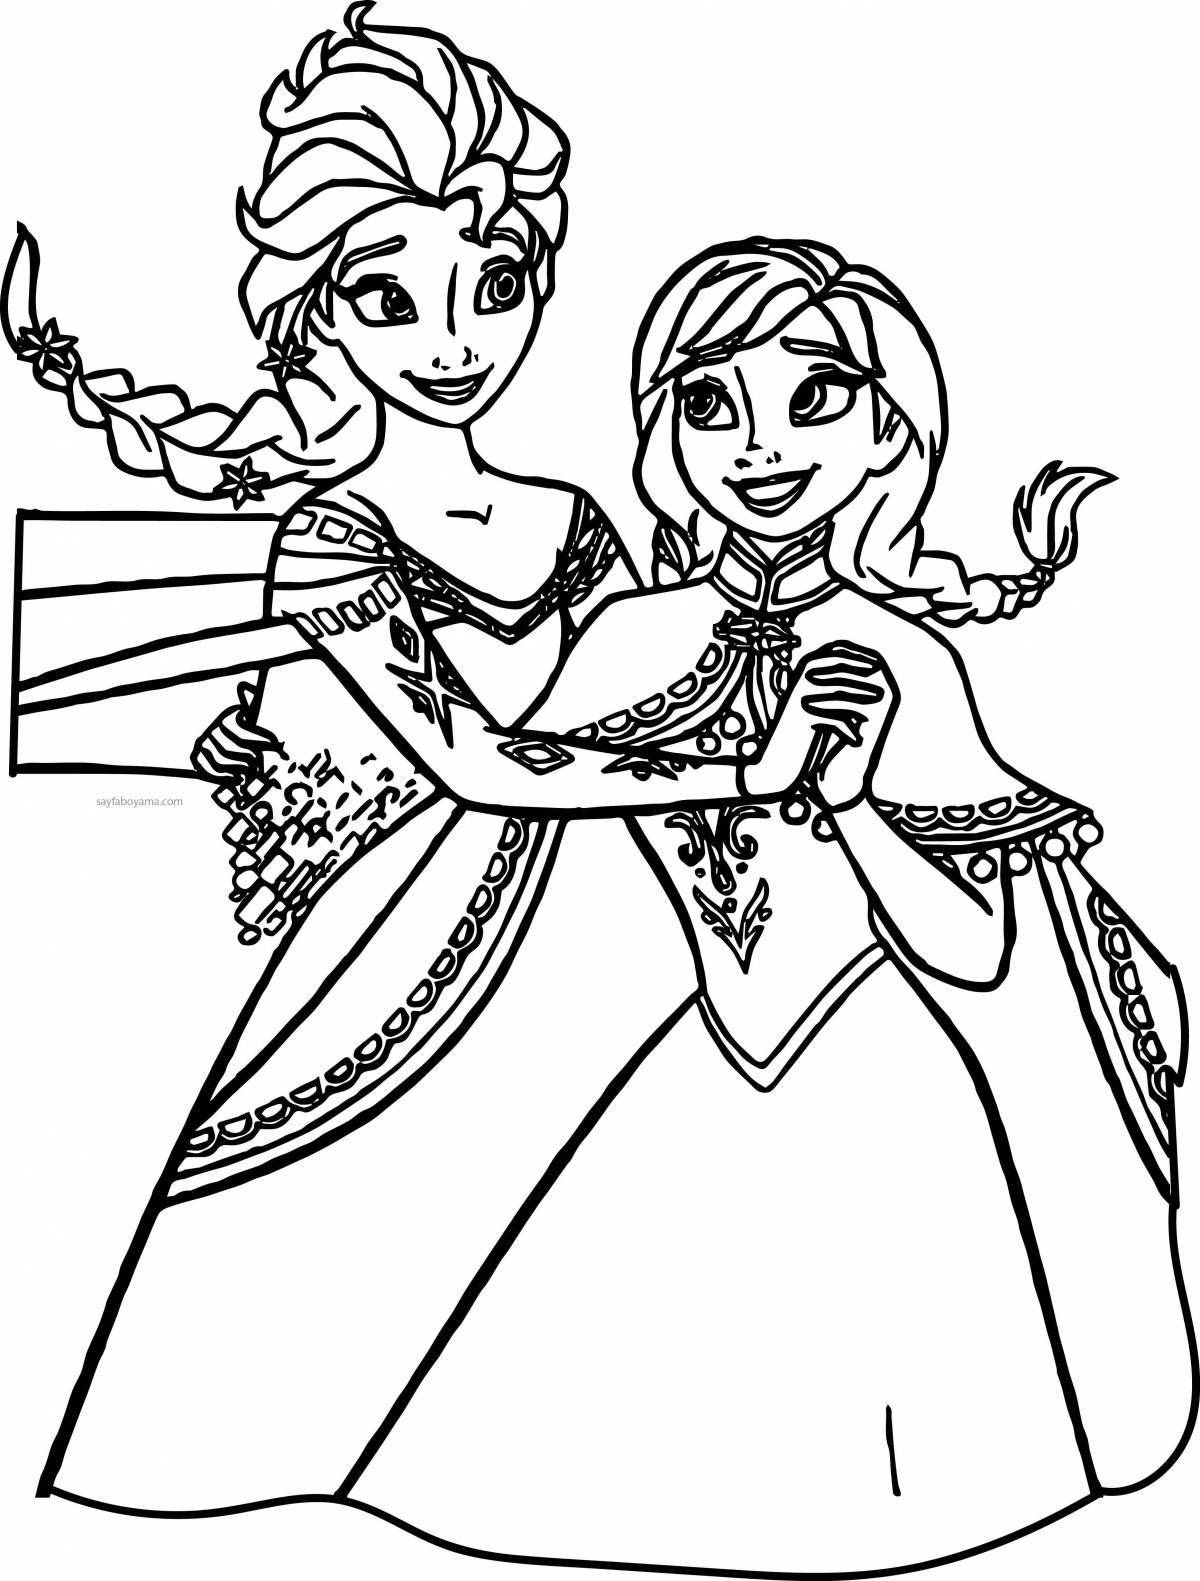 Coloring book for girls anna